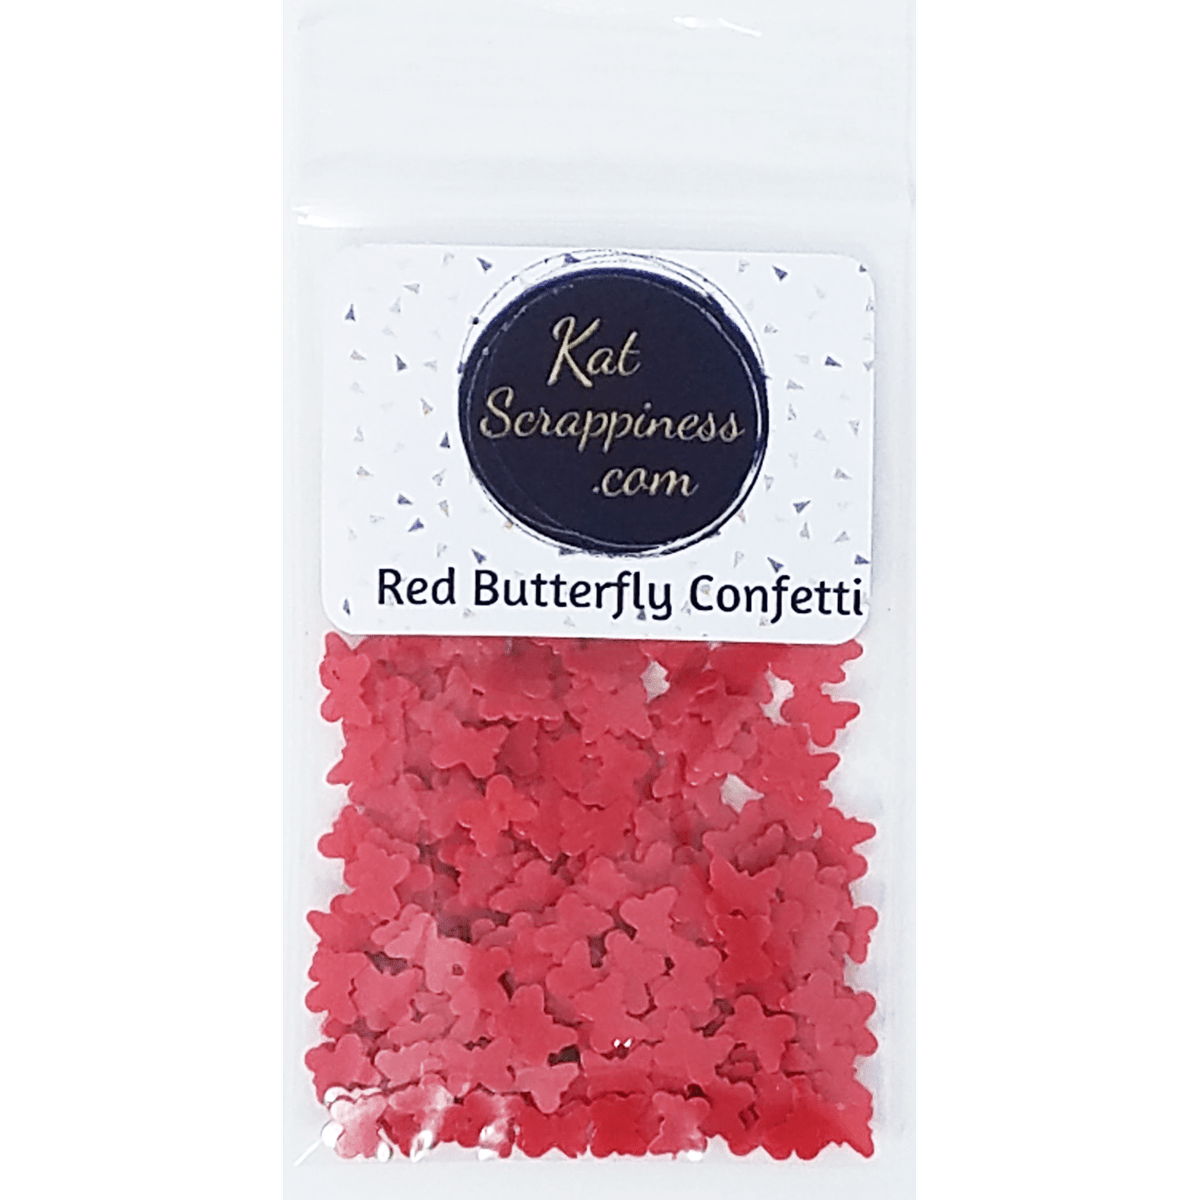 Red Butterfly Confetti - Kat Scrappiness